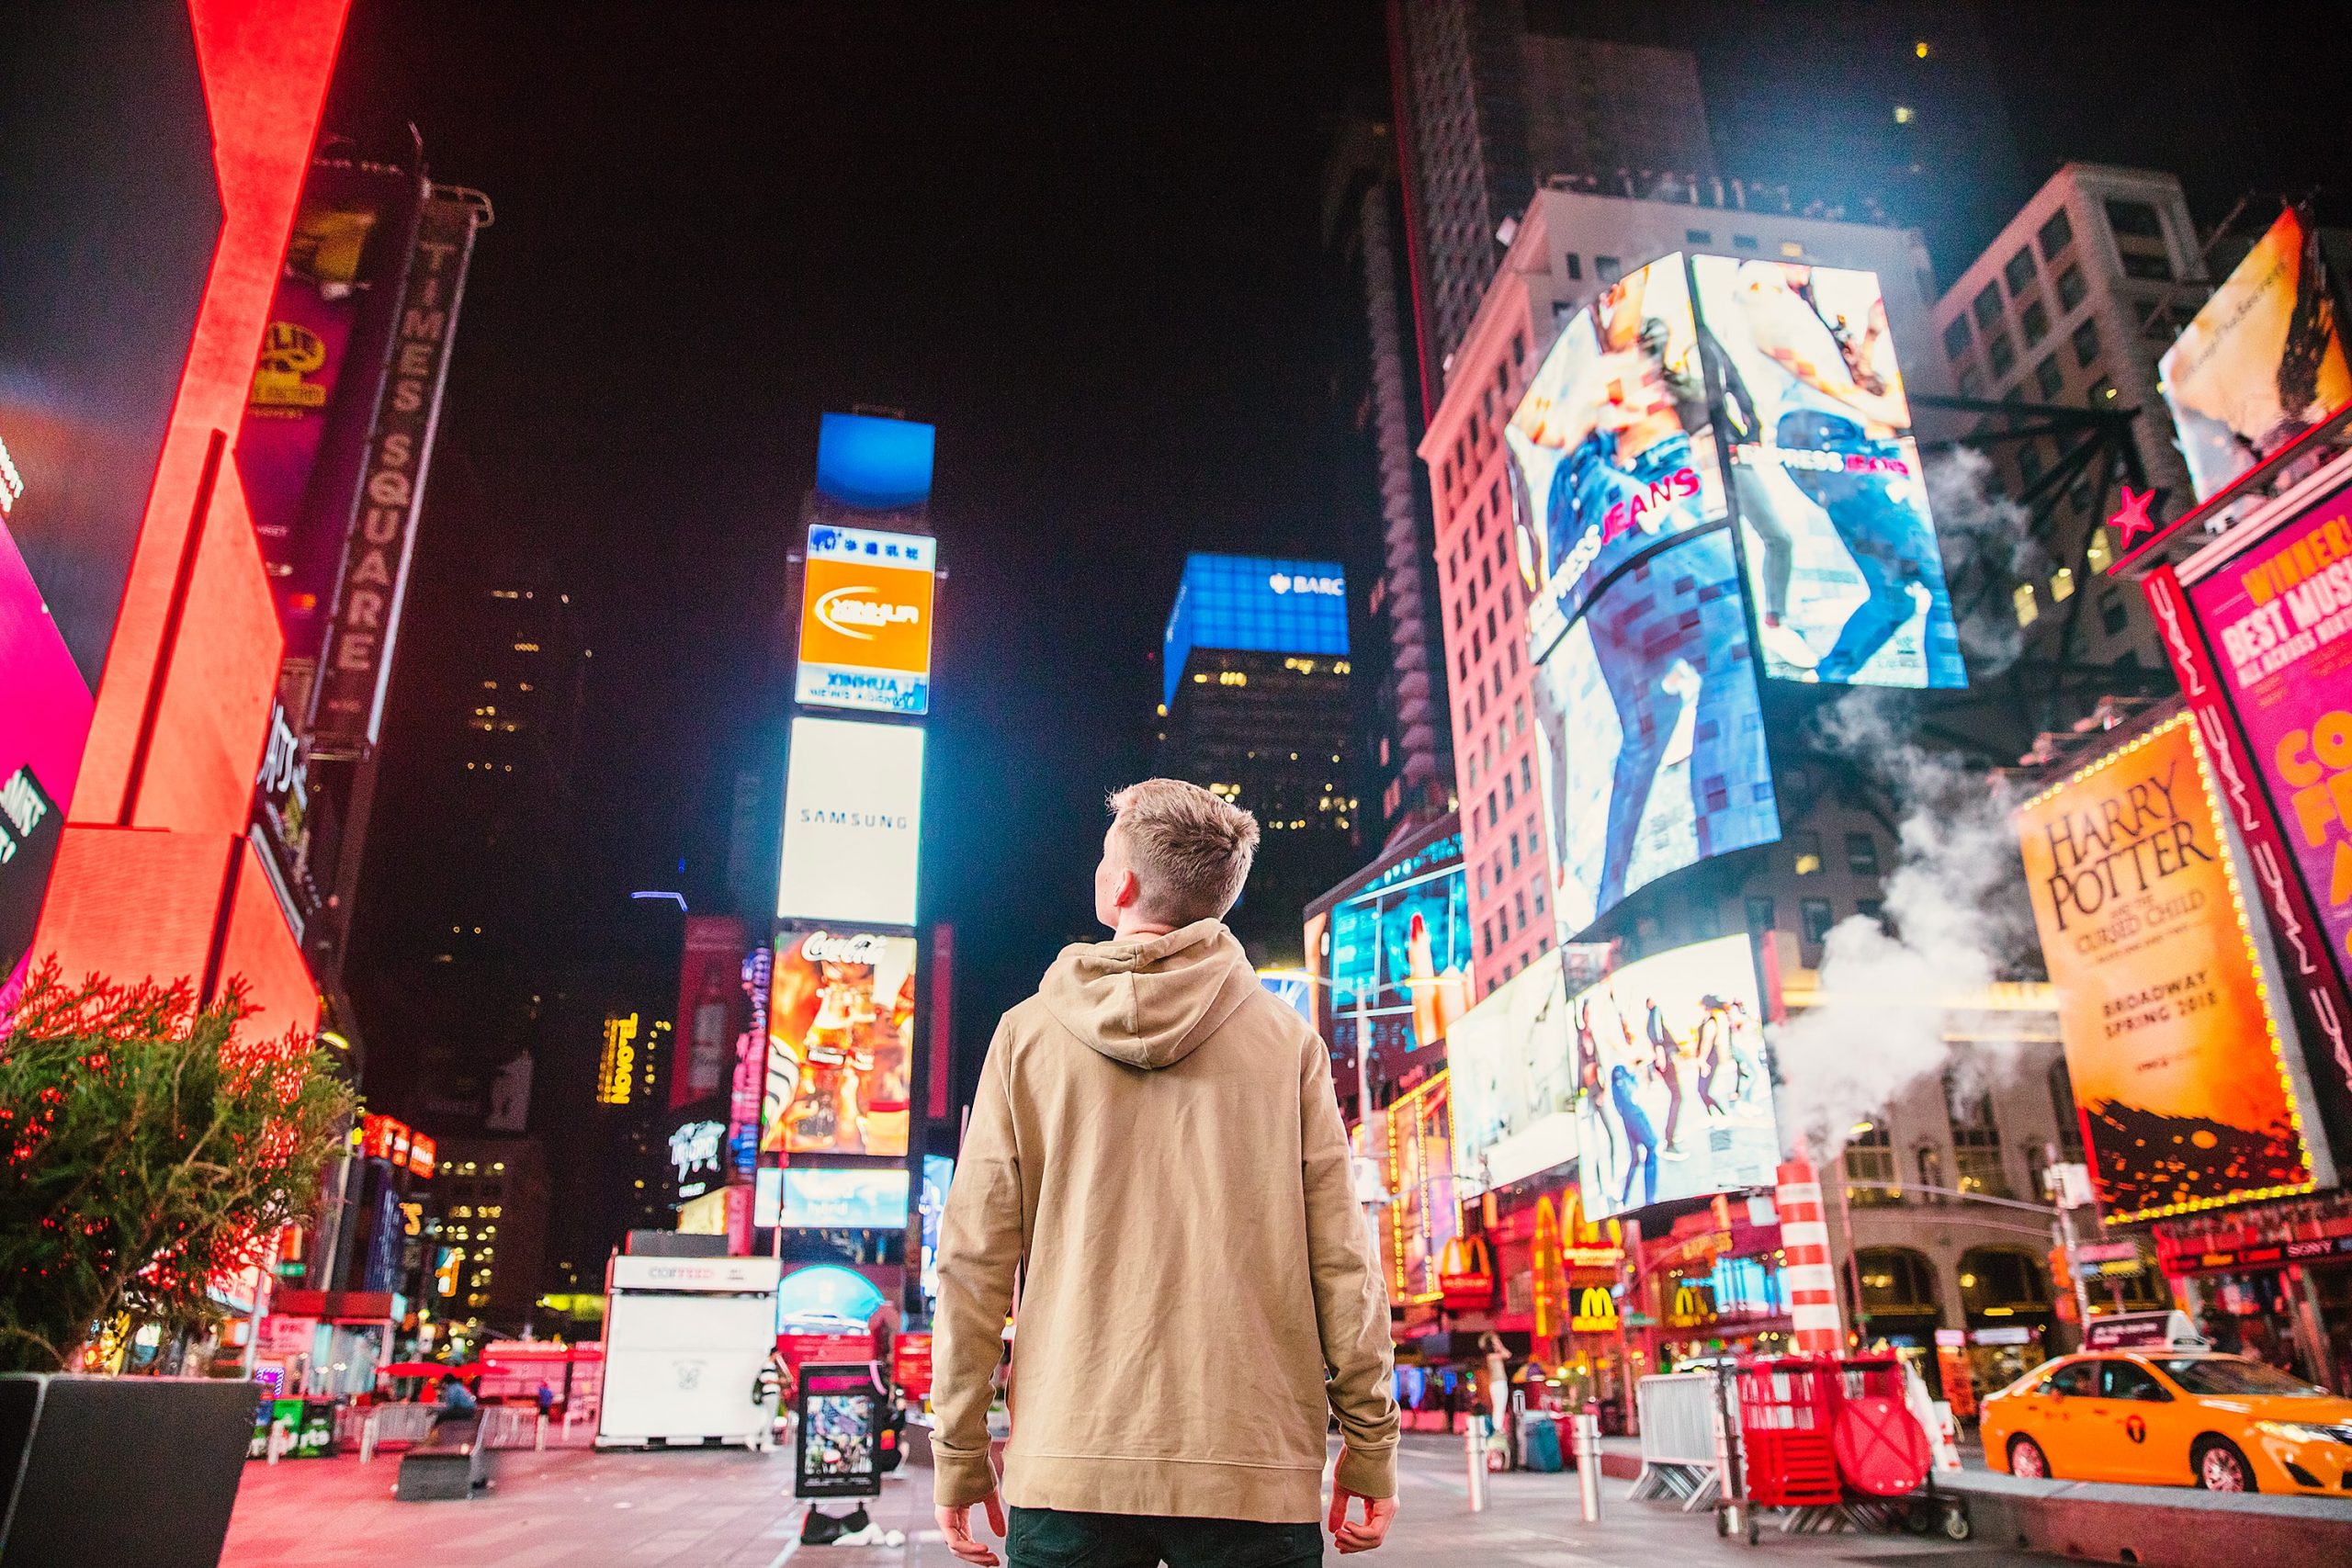 Photograph of a man standing in New York City facing many digital advertisements lit up on the sides of buildings.